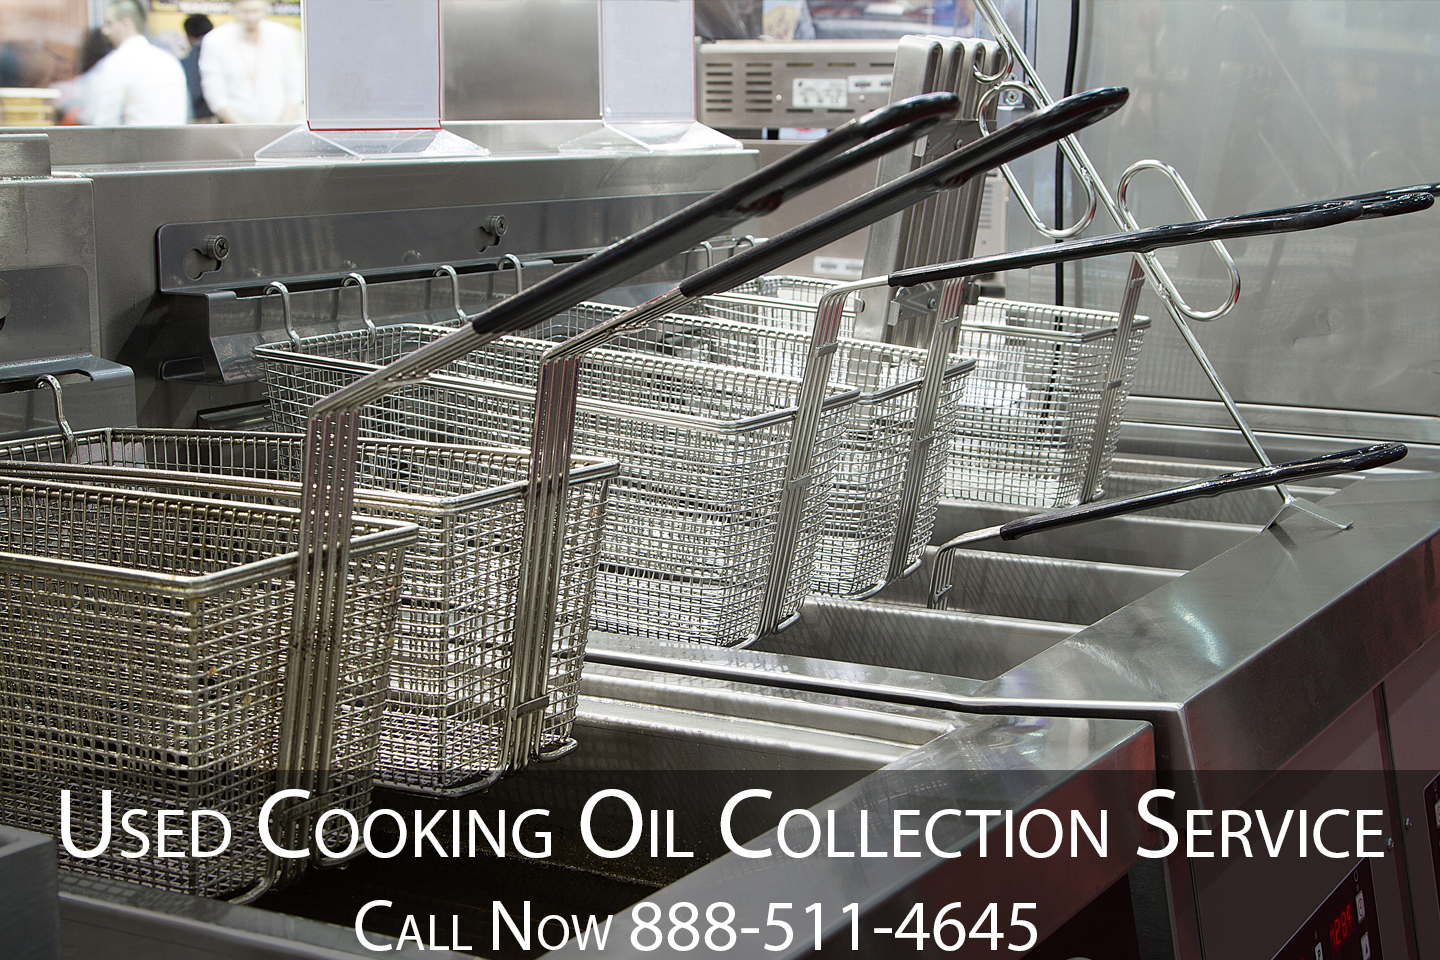 It is required by the city Santa Ana, for all food servicing establishments to hire a licensed used cooking oil collection company to pick up and properly remove their waste cooking oil. As grease collection recycling companies, we must ensure that all waste is transported safely and disposed properly.  The majority of used cooking oil collected from commercial kitchens are filtered and processed turning it into renewable fuel called biodiesel. With a large increase in food servicing estabishments, a substantial amount of coming from restaurants are responsible for a major percentage of fueling transportation vehicles.